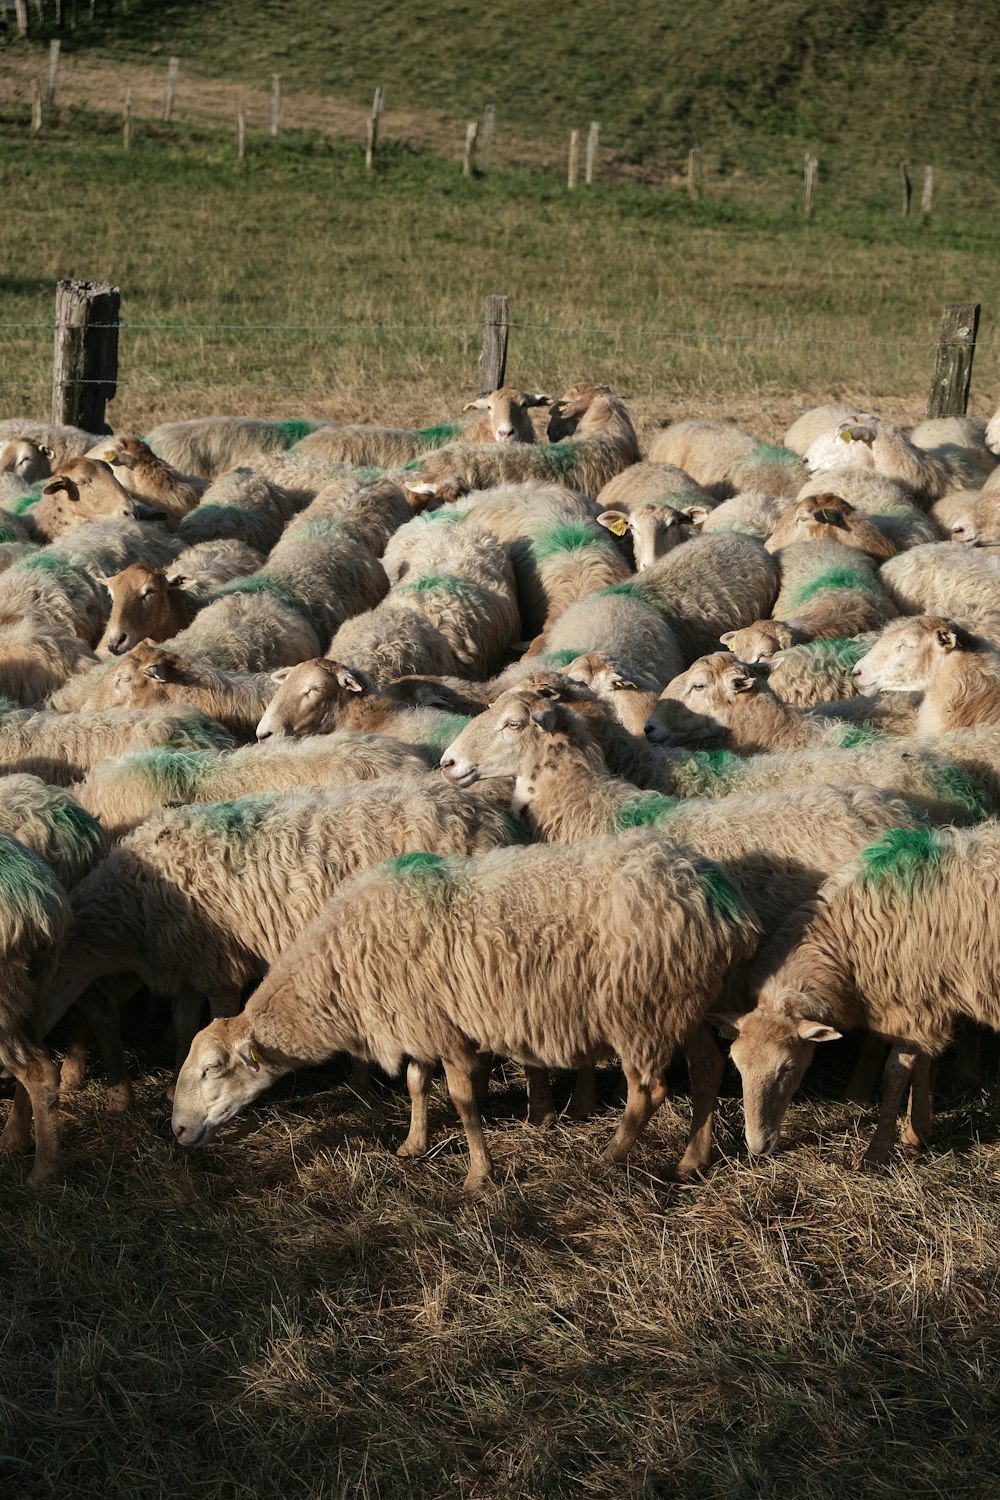 herd of sheep on green grass field during daytime